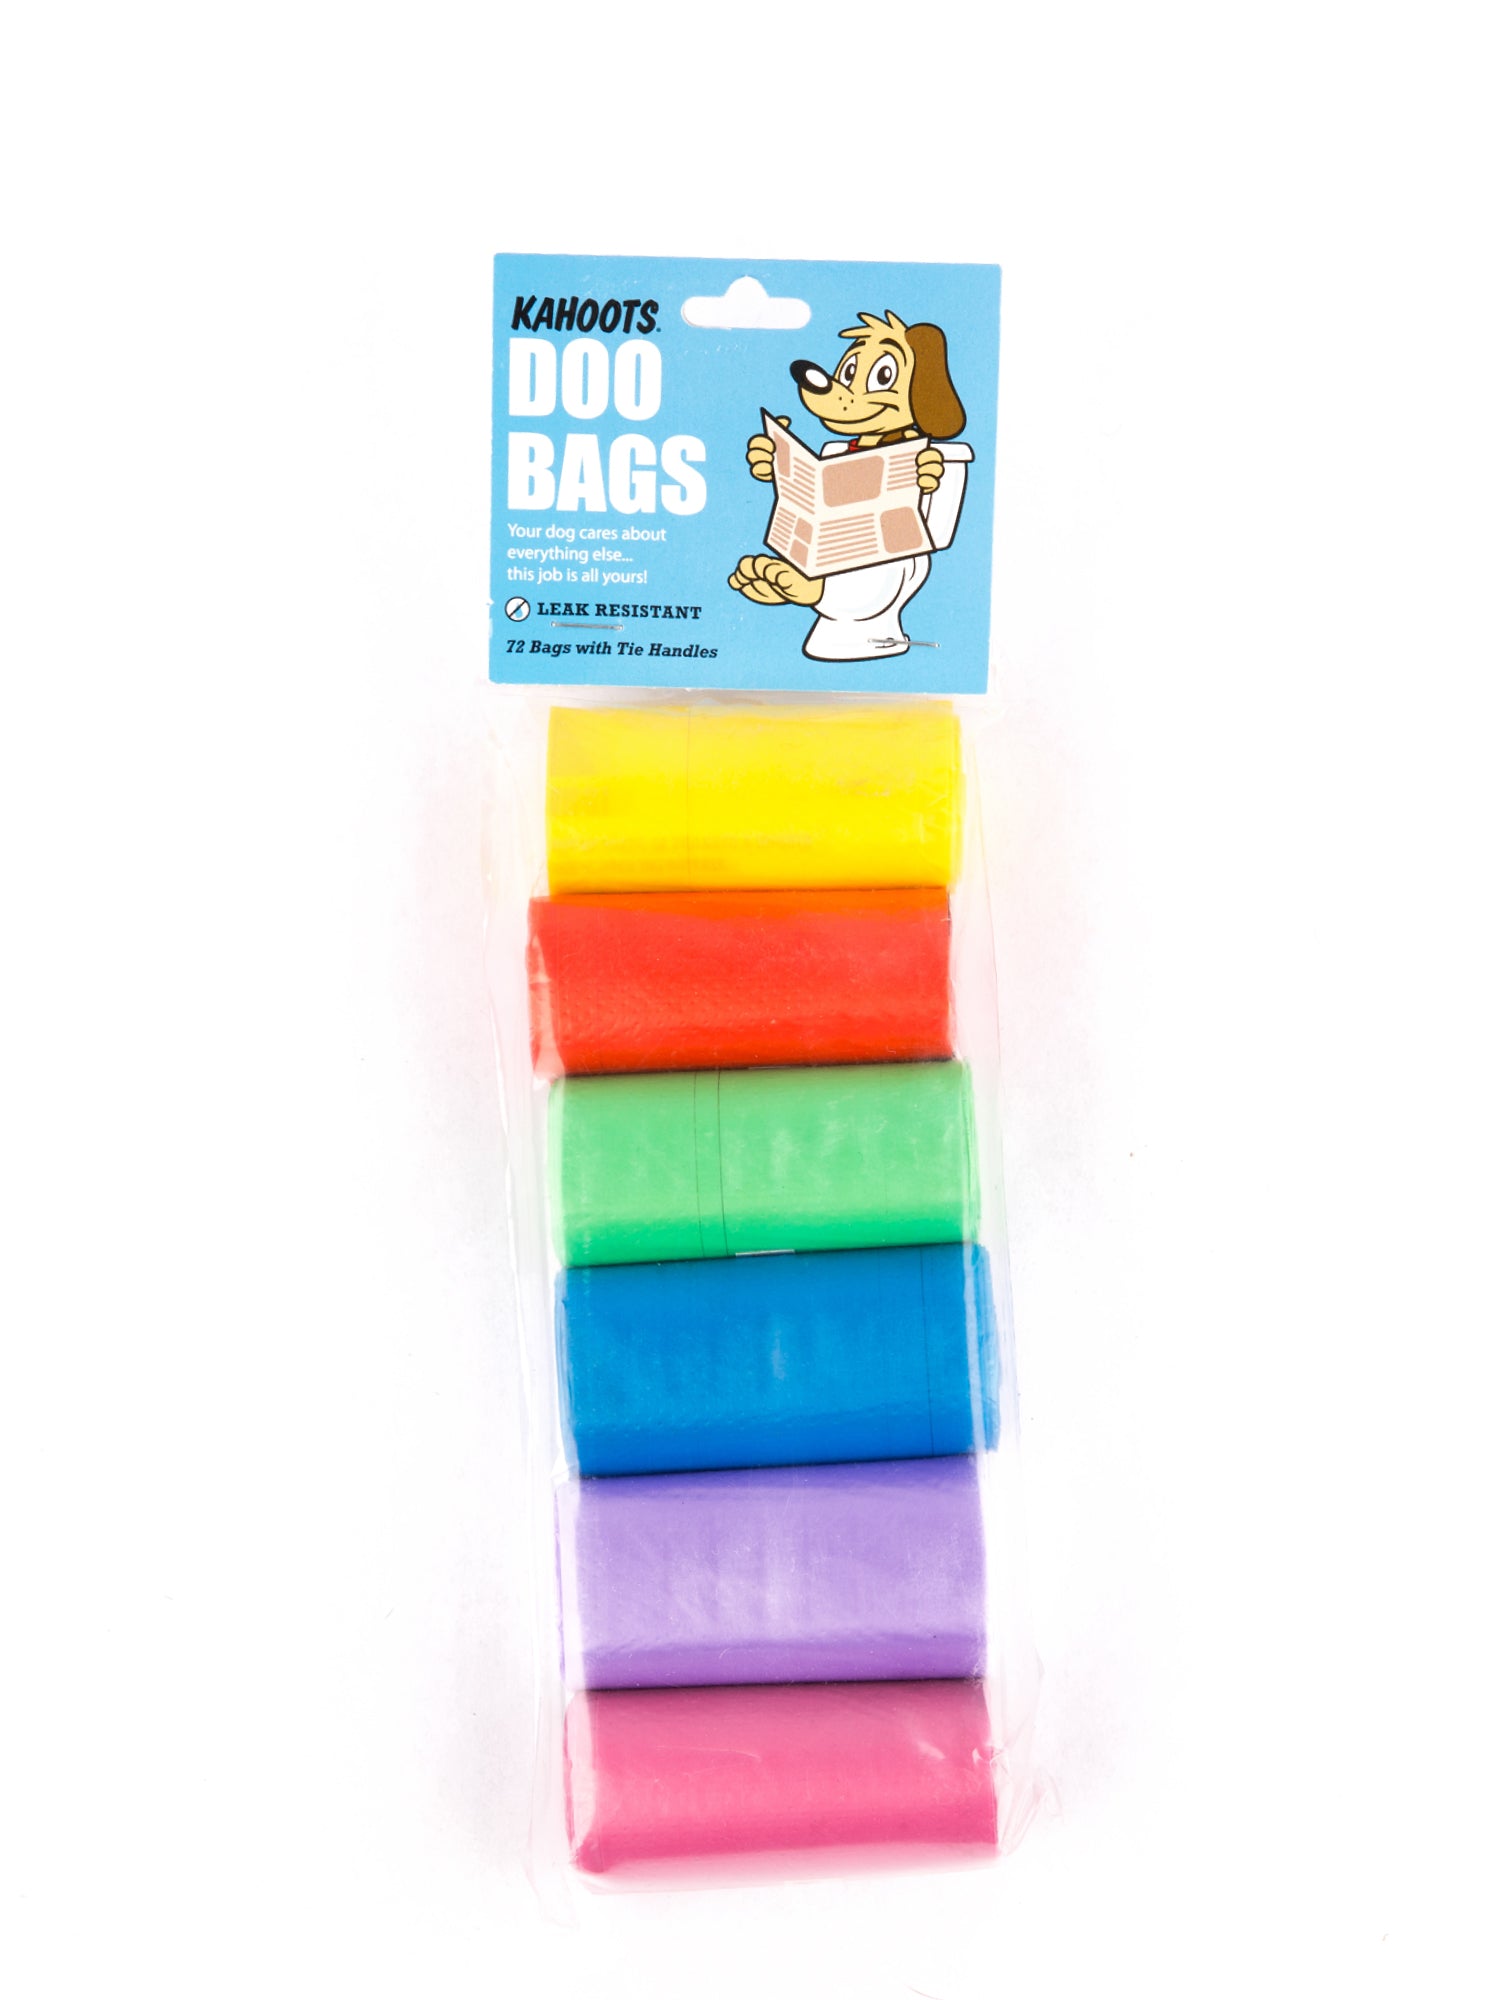 Variety of colorful doo bags in rolls, 6 per pack